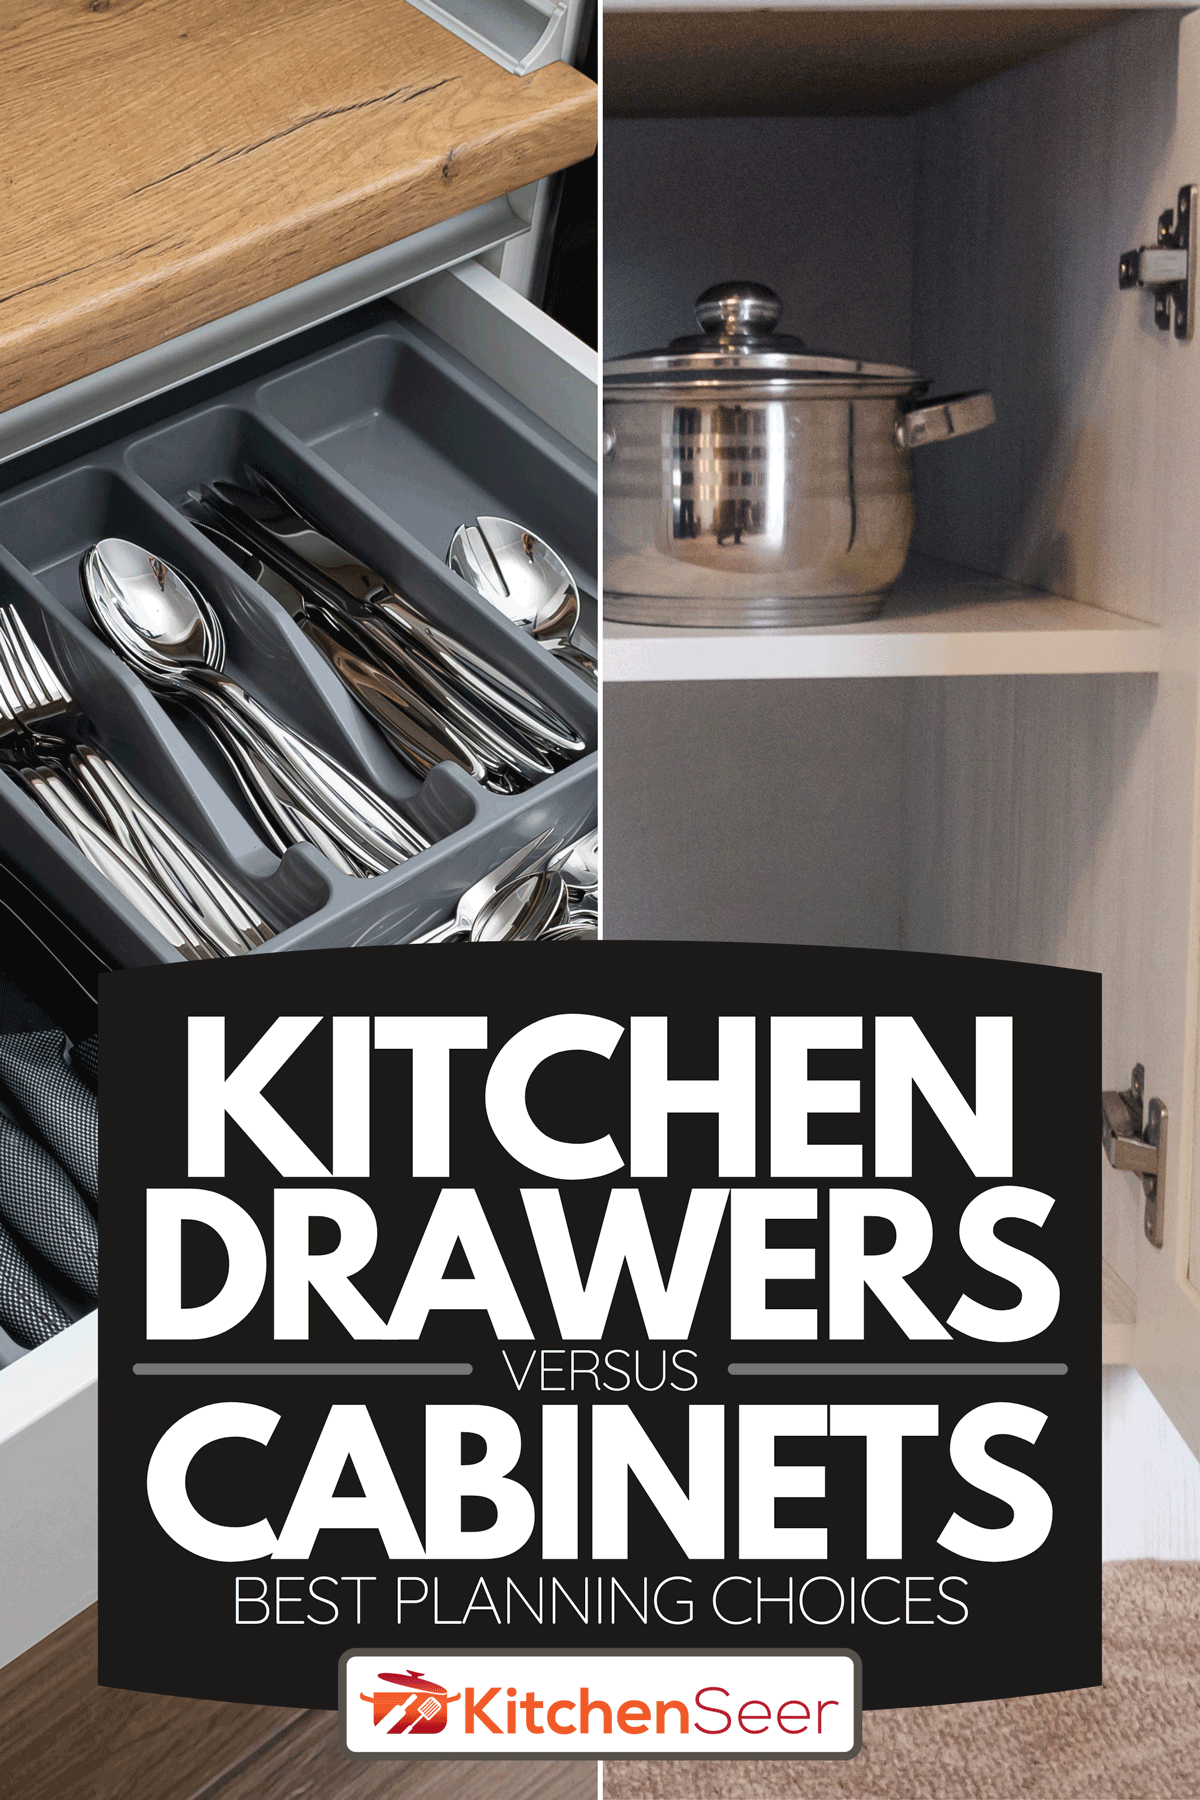 Kitchen Drawers Vs Cabinets - Best Planning Choices - Kitchen Seer